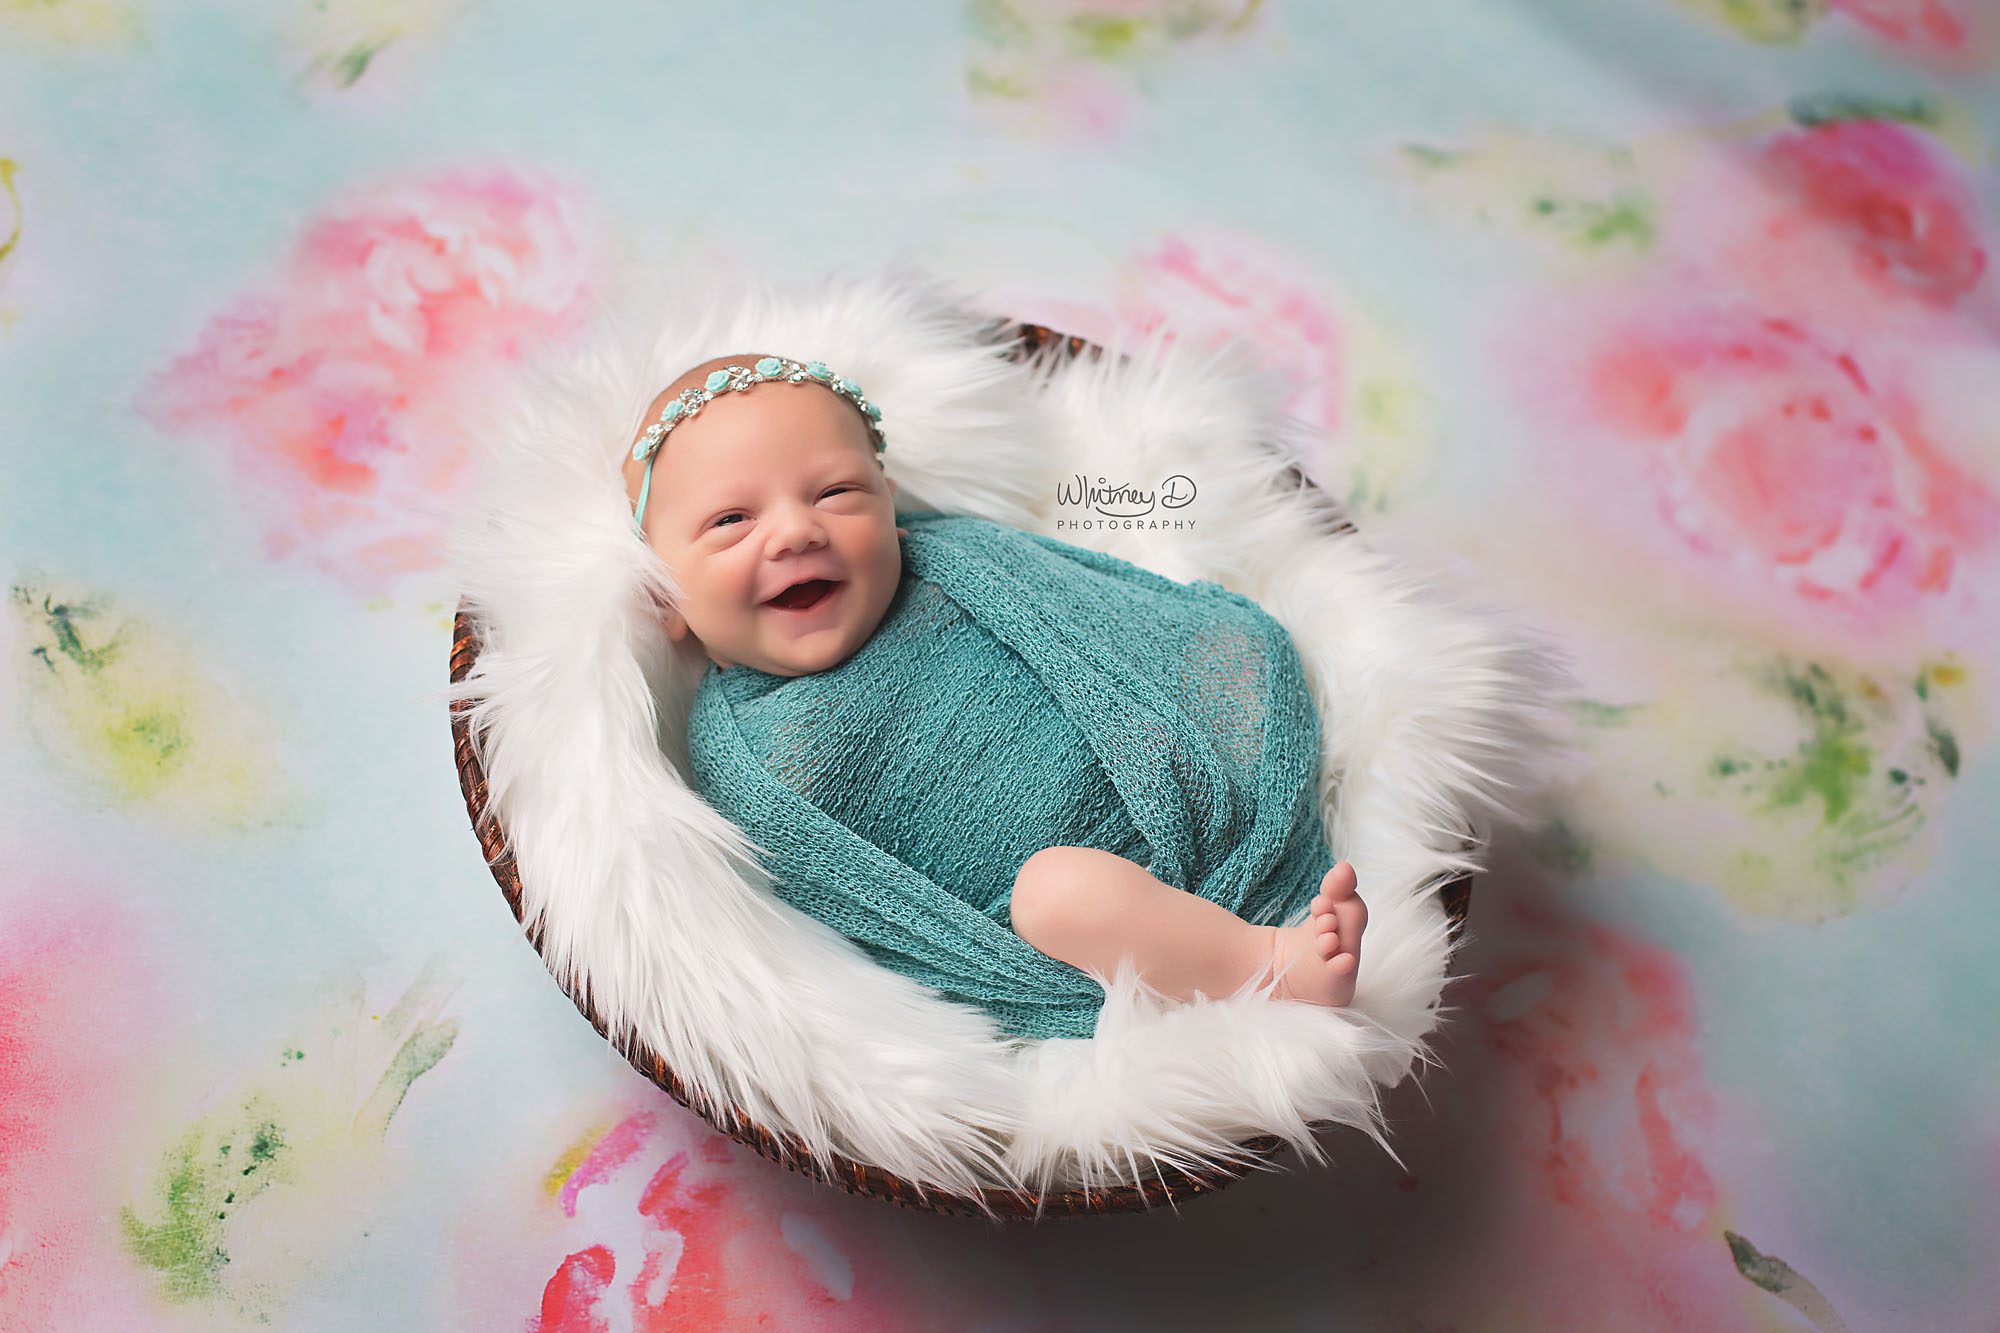 Newborn baby girl smiling on floral background